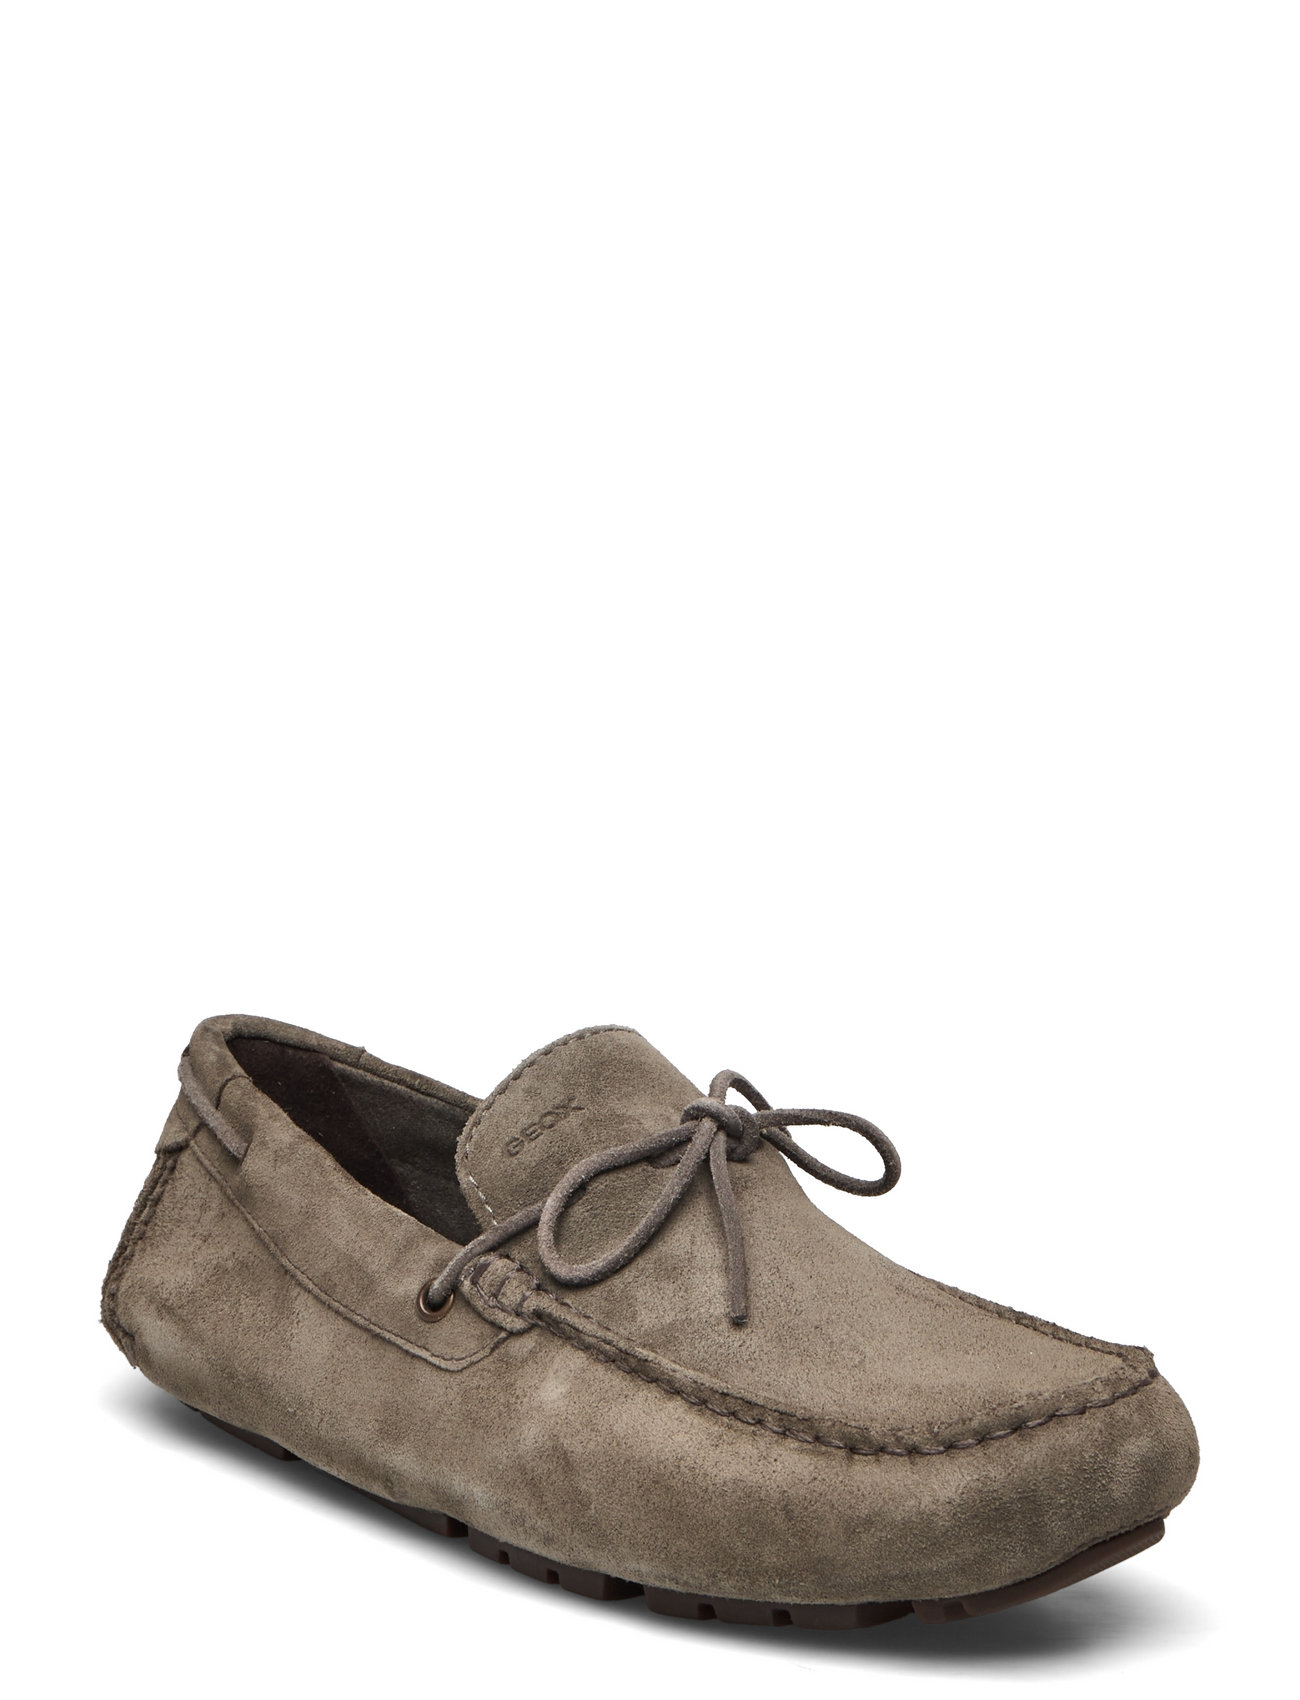 GEOX Melbourne A - Loafers - Boozt.com